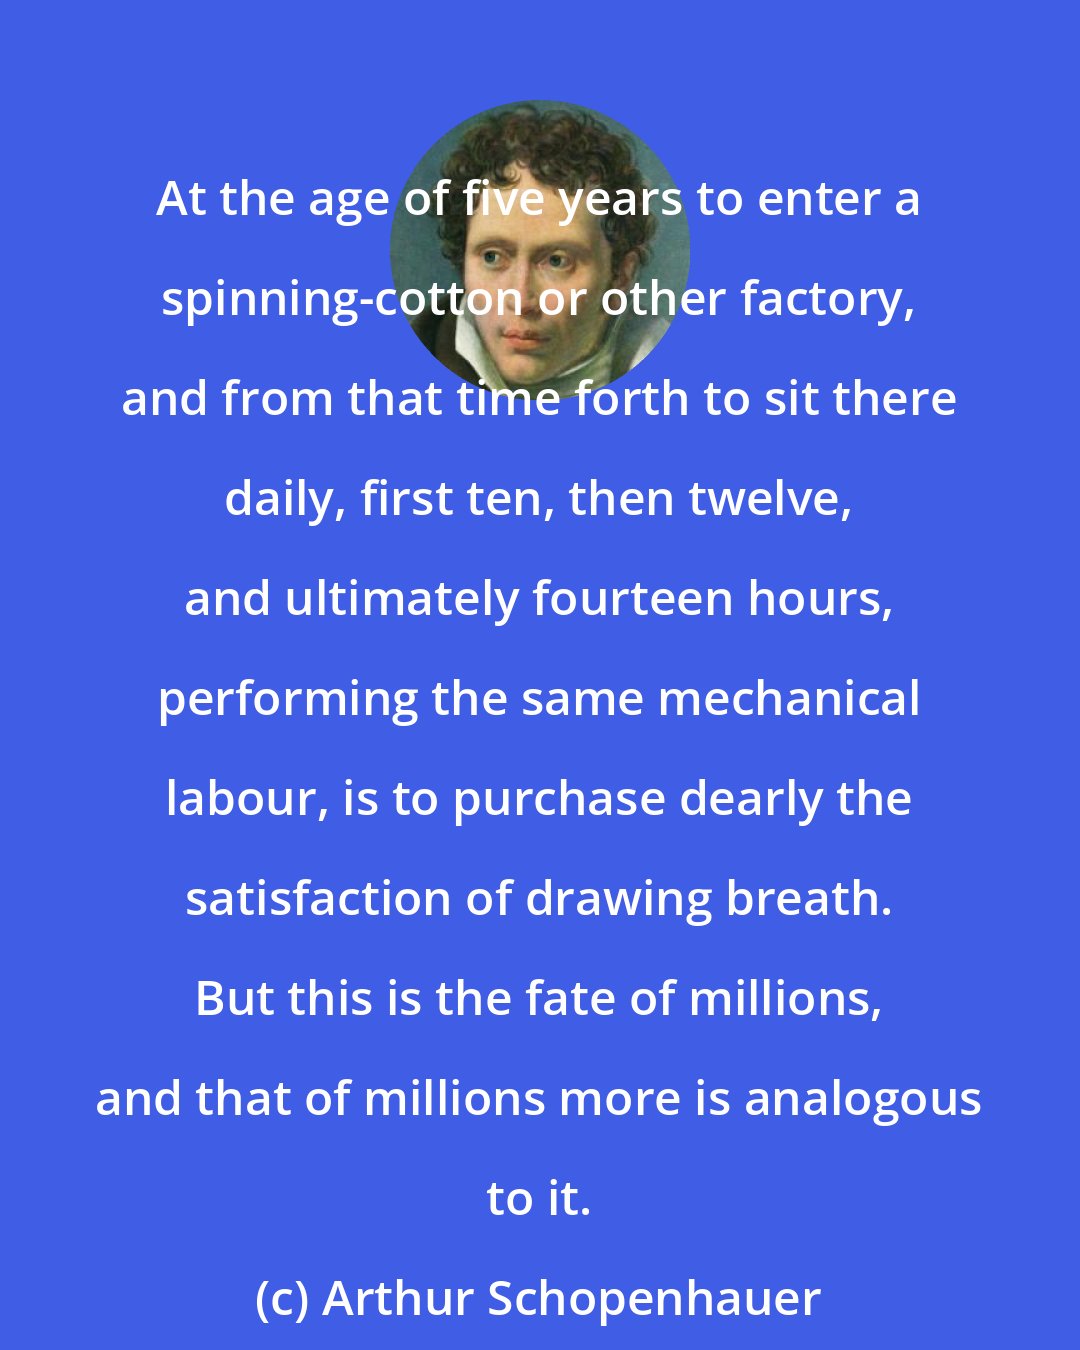 Arthur Schopenhauer: At the age of five years to enter a spinning-cotton or other factory, and from that time forth to sit there daily, first ten, then twelve, and ultimately fourteen hours, performing the same mechanical labour, is to purchase dearly the satisfaction of drawing breath. But this is the fate of millions, and that of millions more is analogous to it.